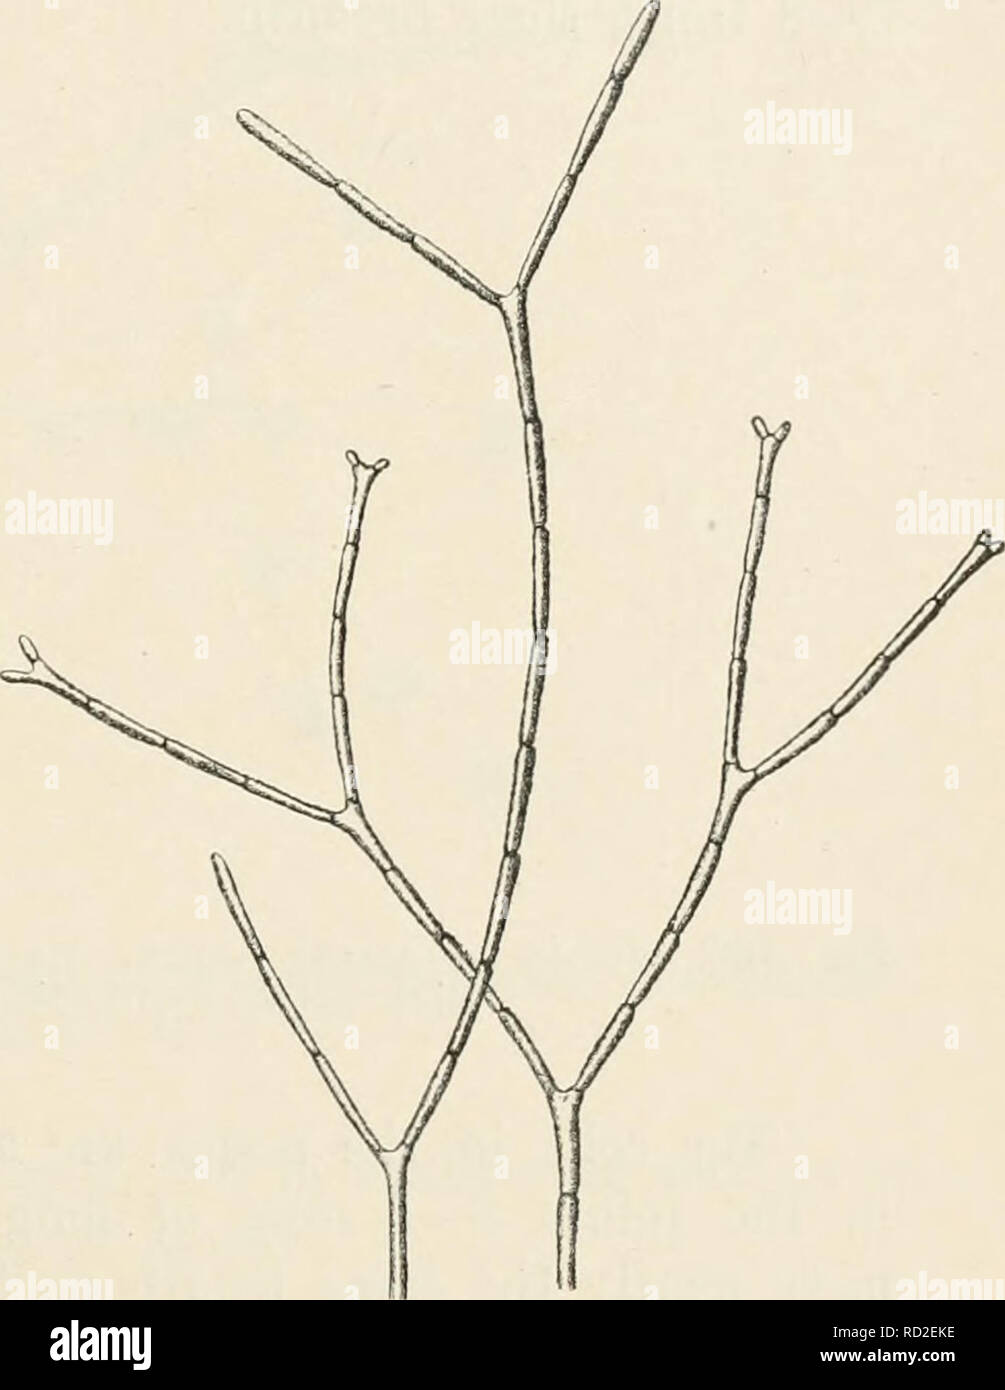 . Dansk botanisk arkiv. Plants; Plants -- Denmark. Fig. 184. Jania adhaerens Lamx. Habit of a specimen. (About 7 :1).. Fig. 185. Jania adhaerens Lamx. Upper ends of fdaments showing the regular dichotomy. (About 20 :1). proportion to breadth etc., but nevertheless it seems very natural to me to take them together, as transitional links are found between them and they, most probably, are nothing but variations of the same plant due to differences in habitat. The plant grows upon stones, corals or similar substrata or intertwisted among other Corallinaceæ, e. g. Amphiroa fragilissima or epiphyti Stock Photo